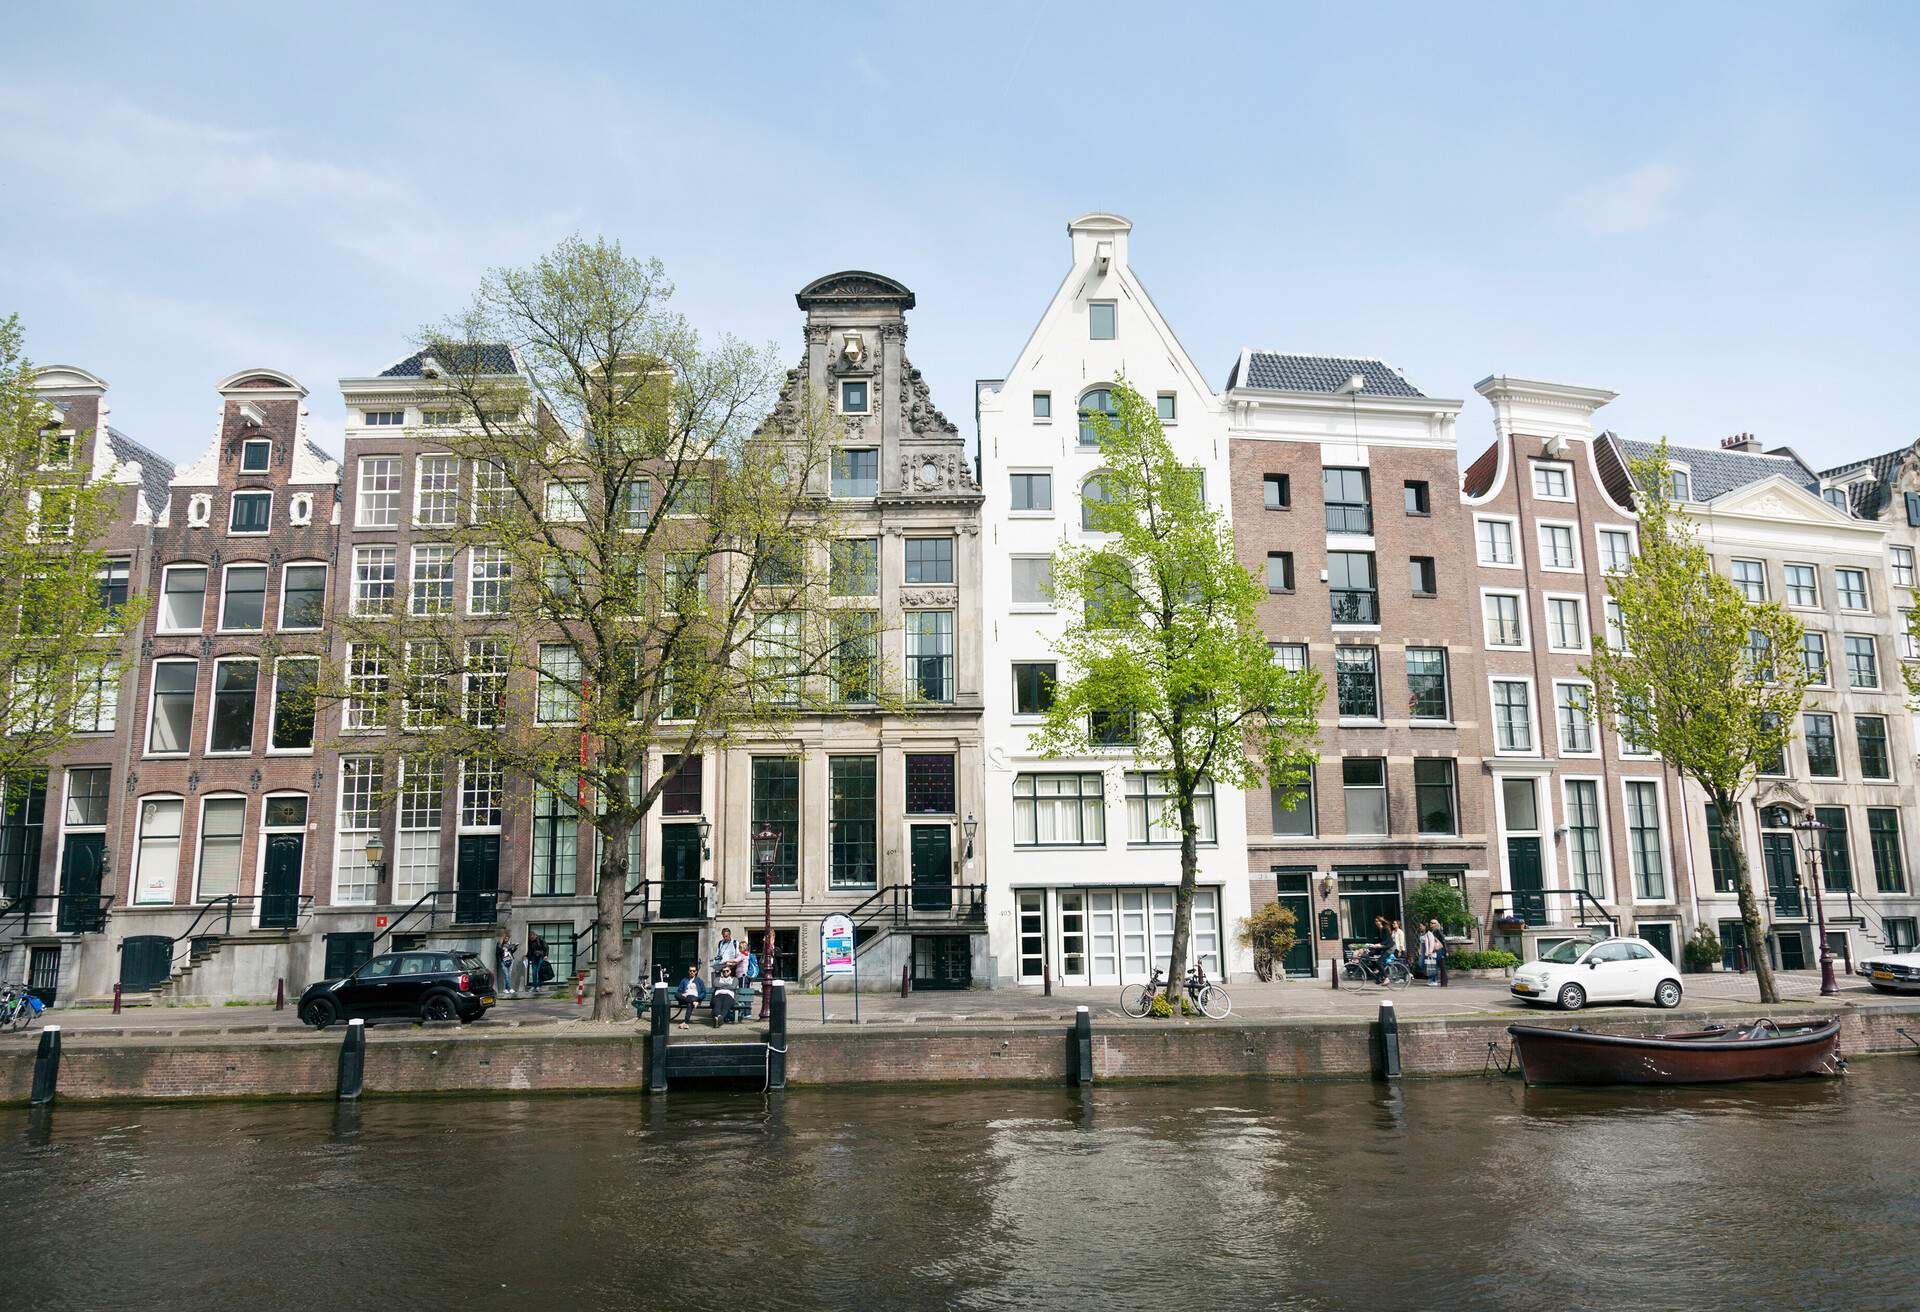 The canal in Amsterdam with it's iconic narrow buildings